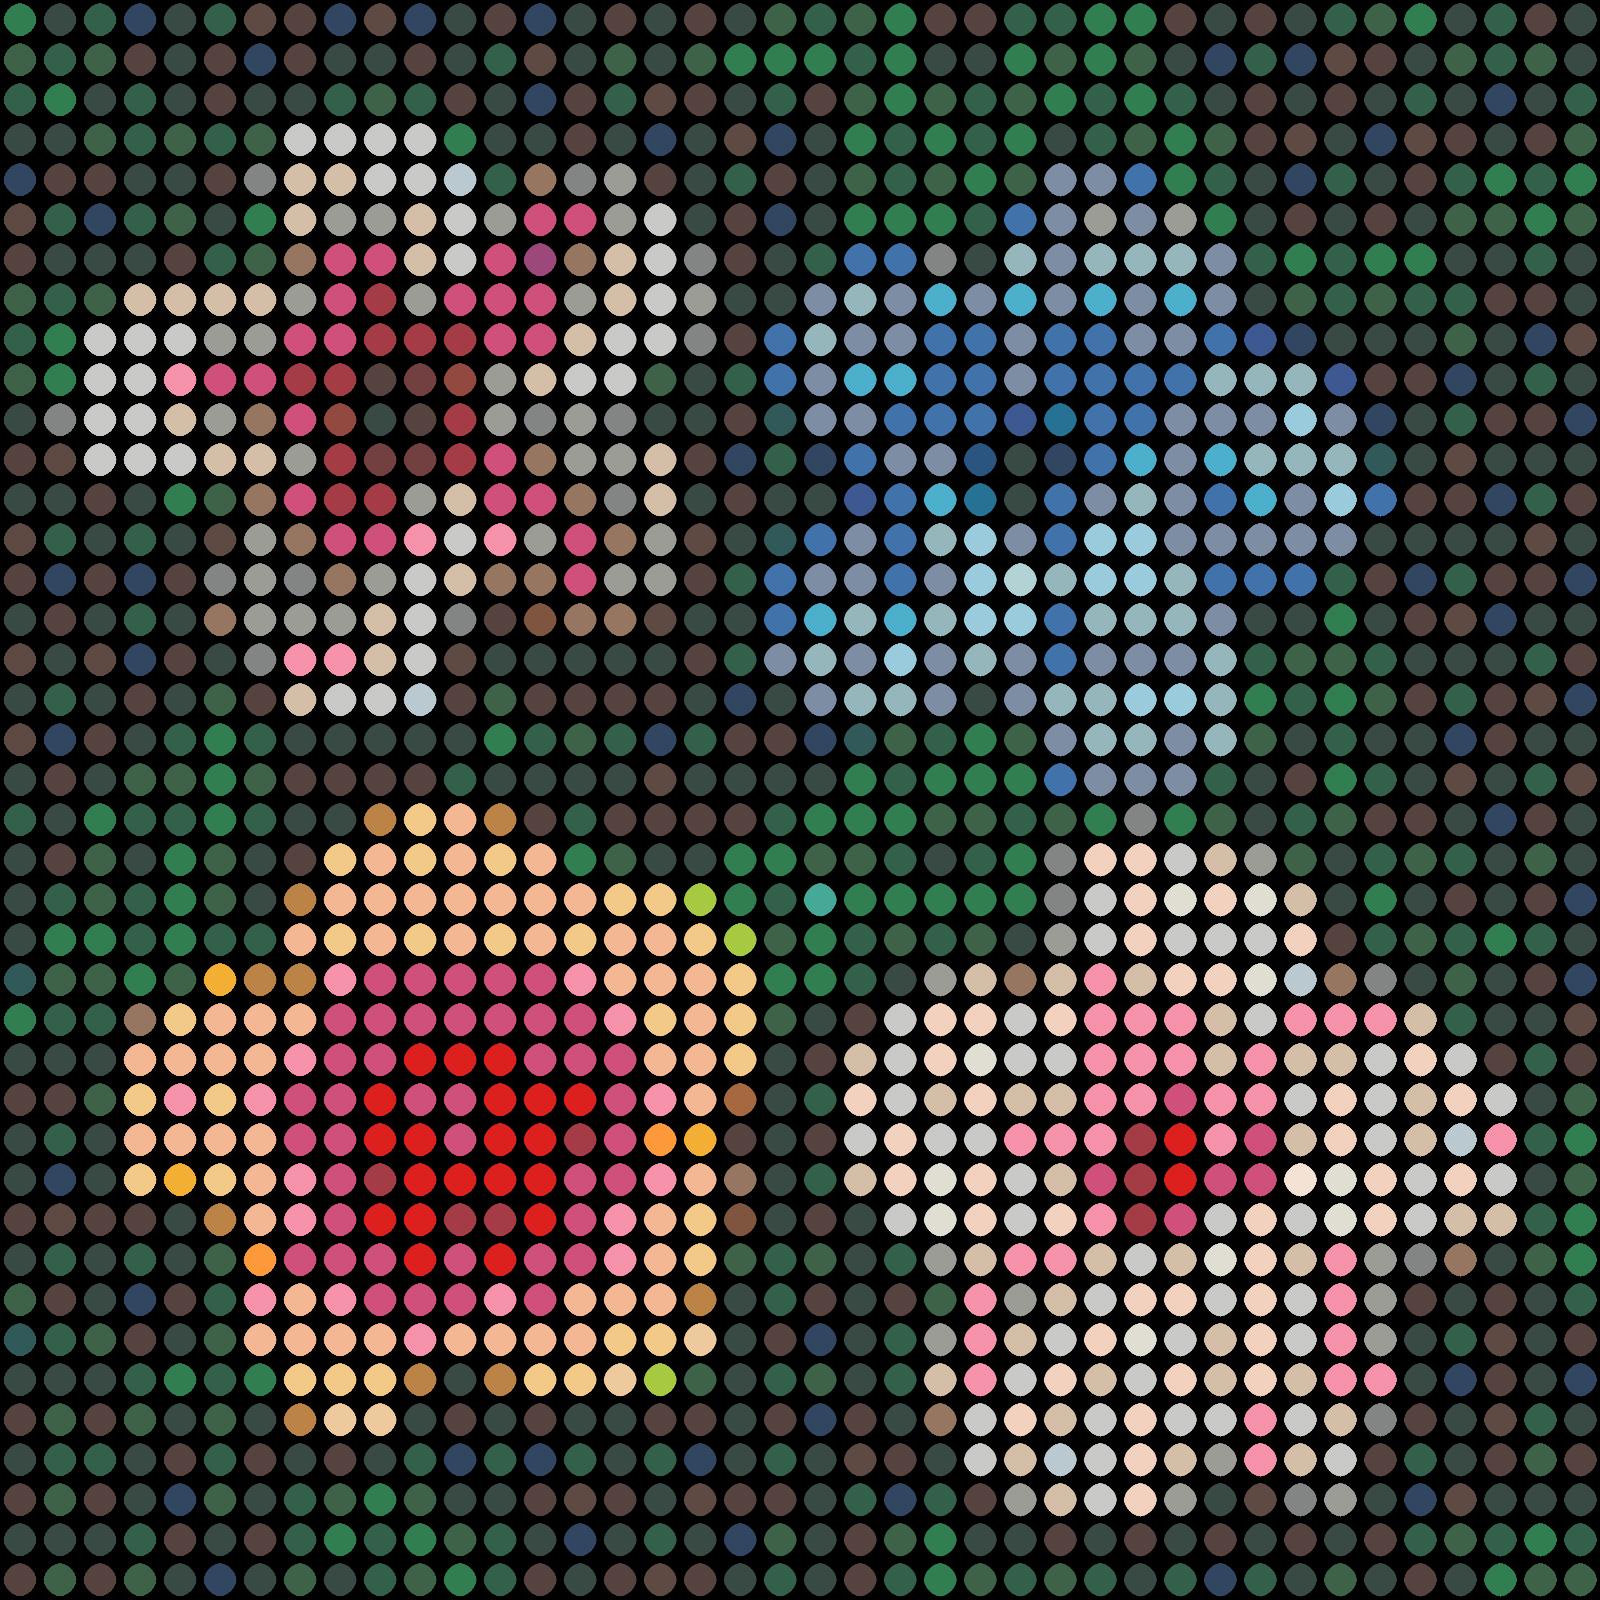 Series: Pop
Oil Enamel Paint on Canvas

I consider each colored dot to be like a person. You and me and everyone. Together we all make up that image shown. You will notice that in my work all the dots are spread out evenly in a grid. The grid stands